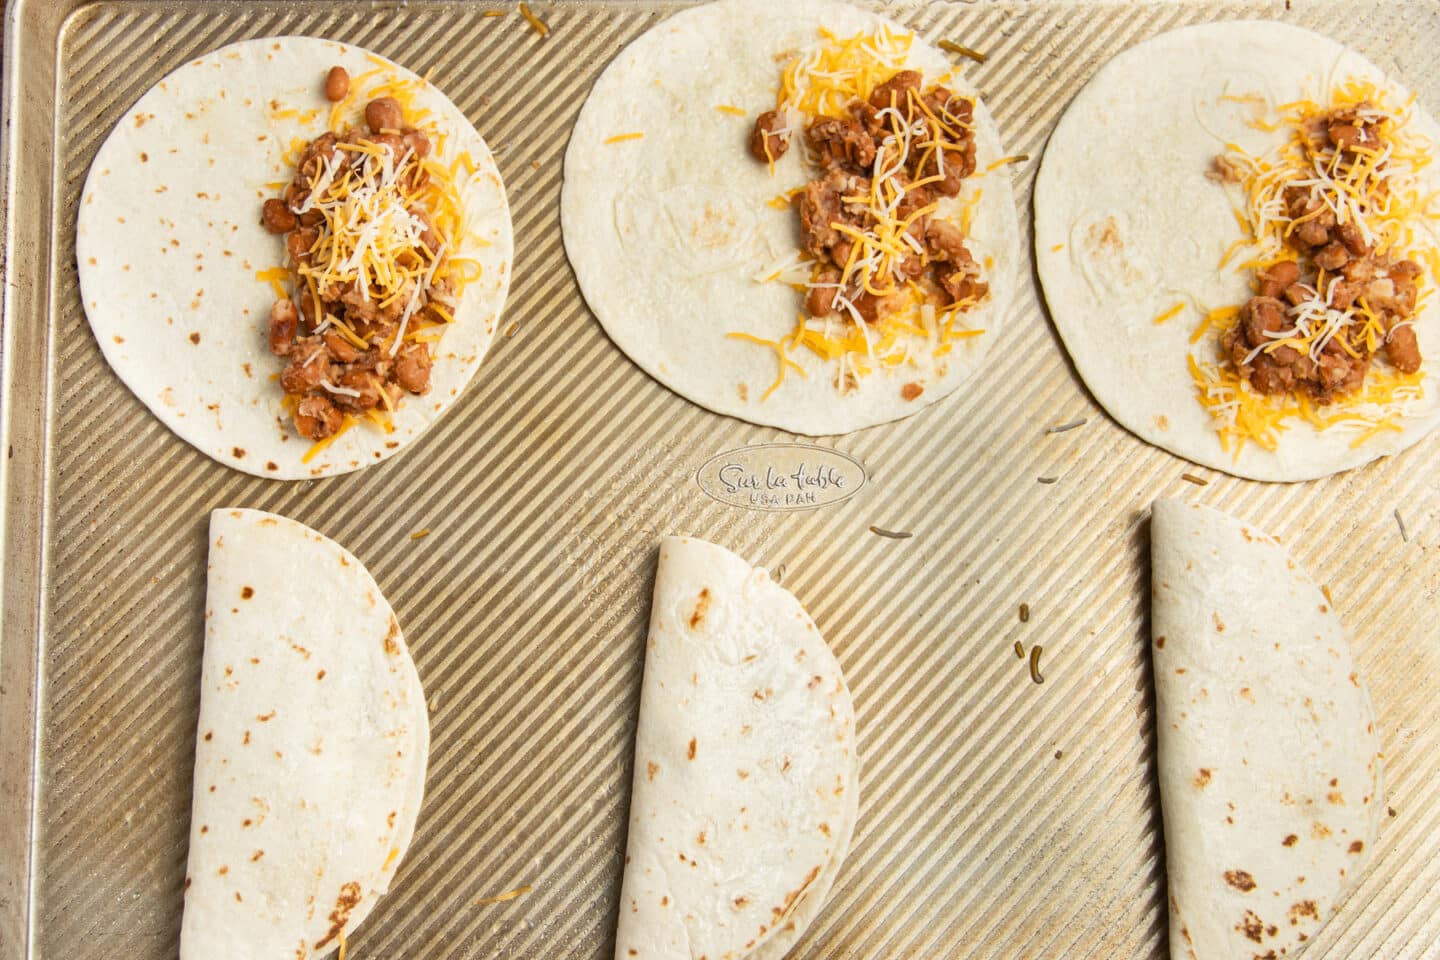 This is a picture of the tortillas being filled with bean and cheese.